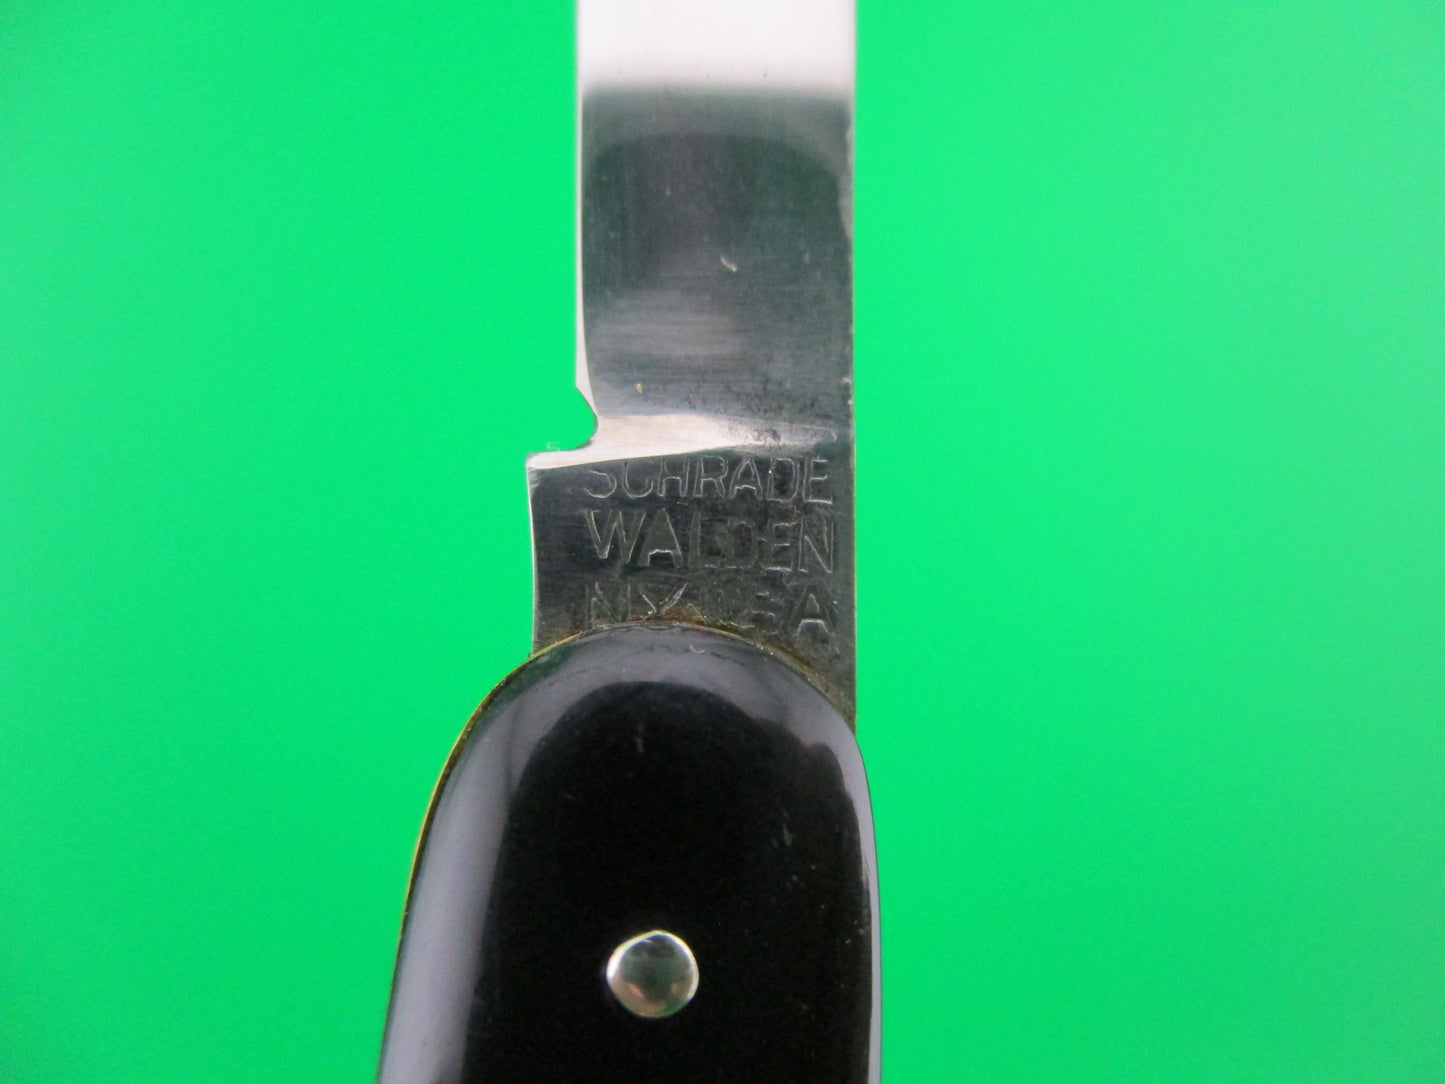 Schrade Walden Small Black double 745B vintage automatic knife